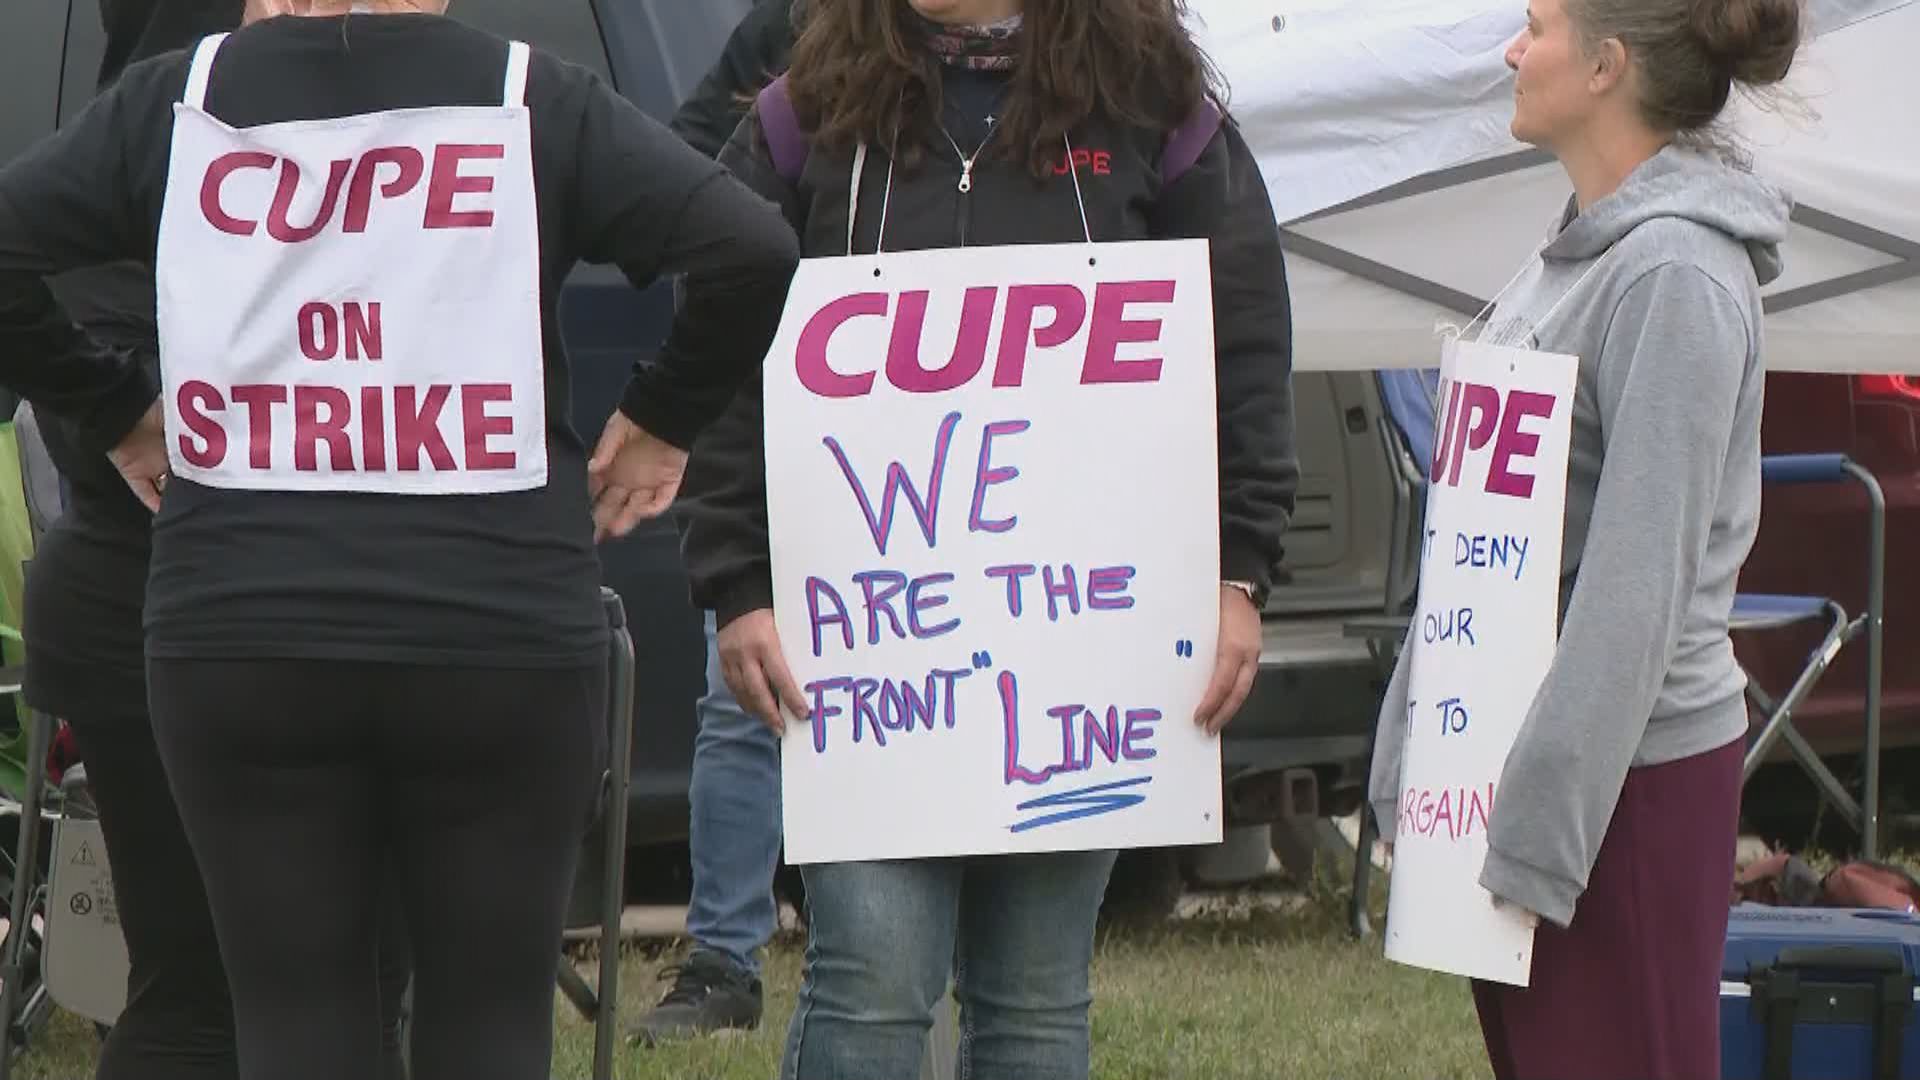 CUPE 882 claims Prince Albert mayor drove through picket line